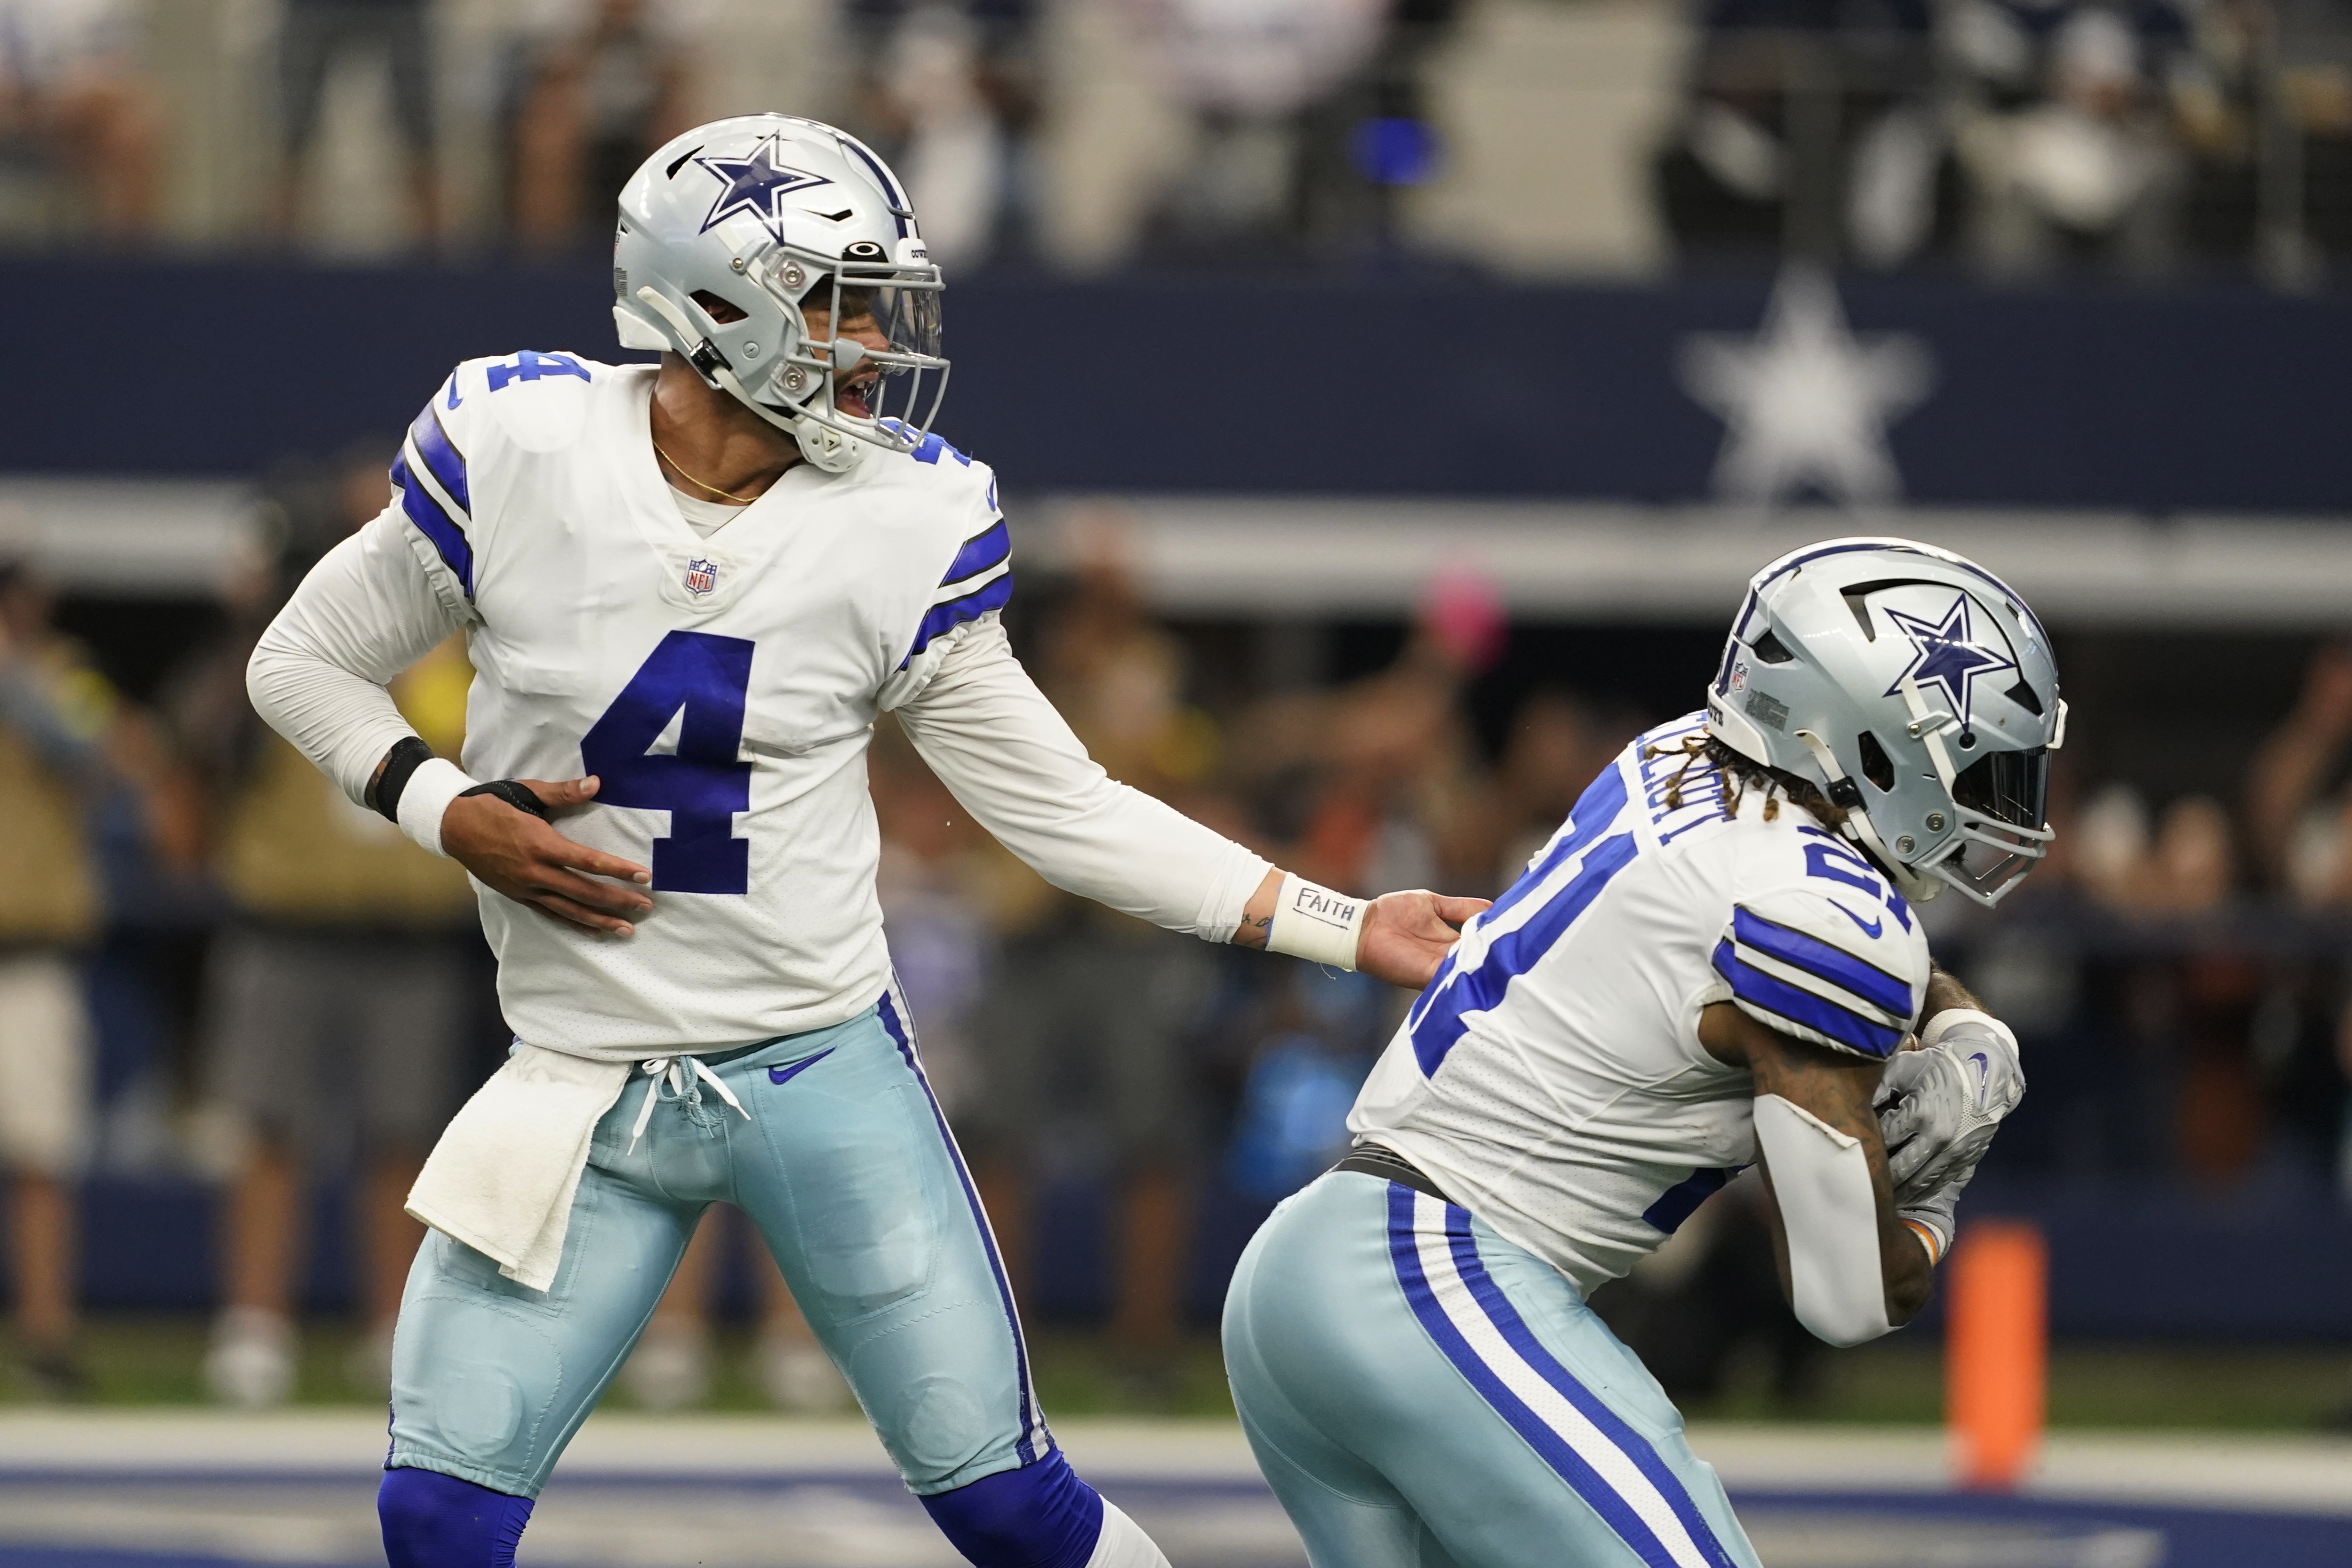 Vikings at Cowboys: Game Time, TV Channel, Radio, Streaming and More